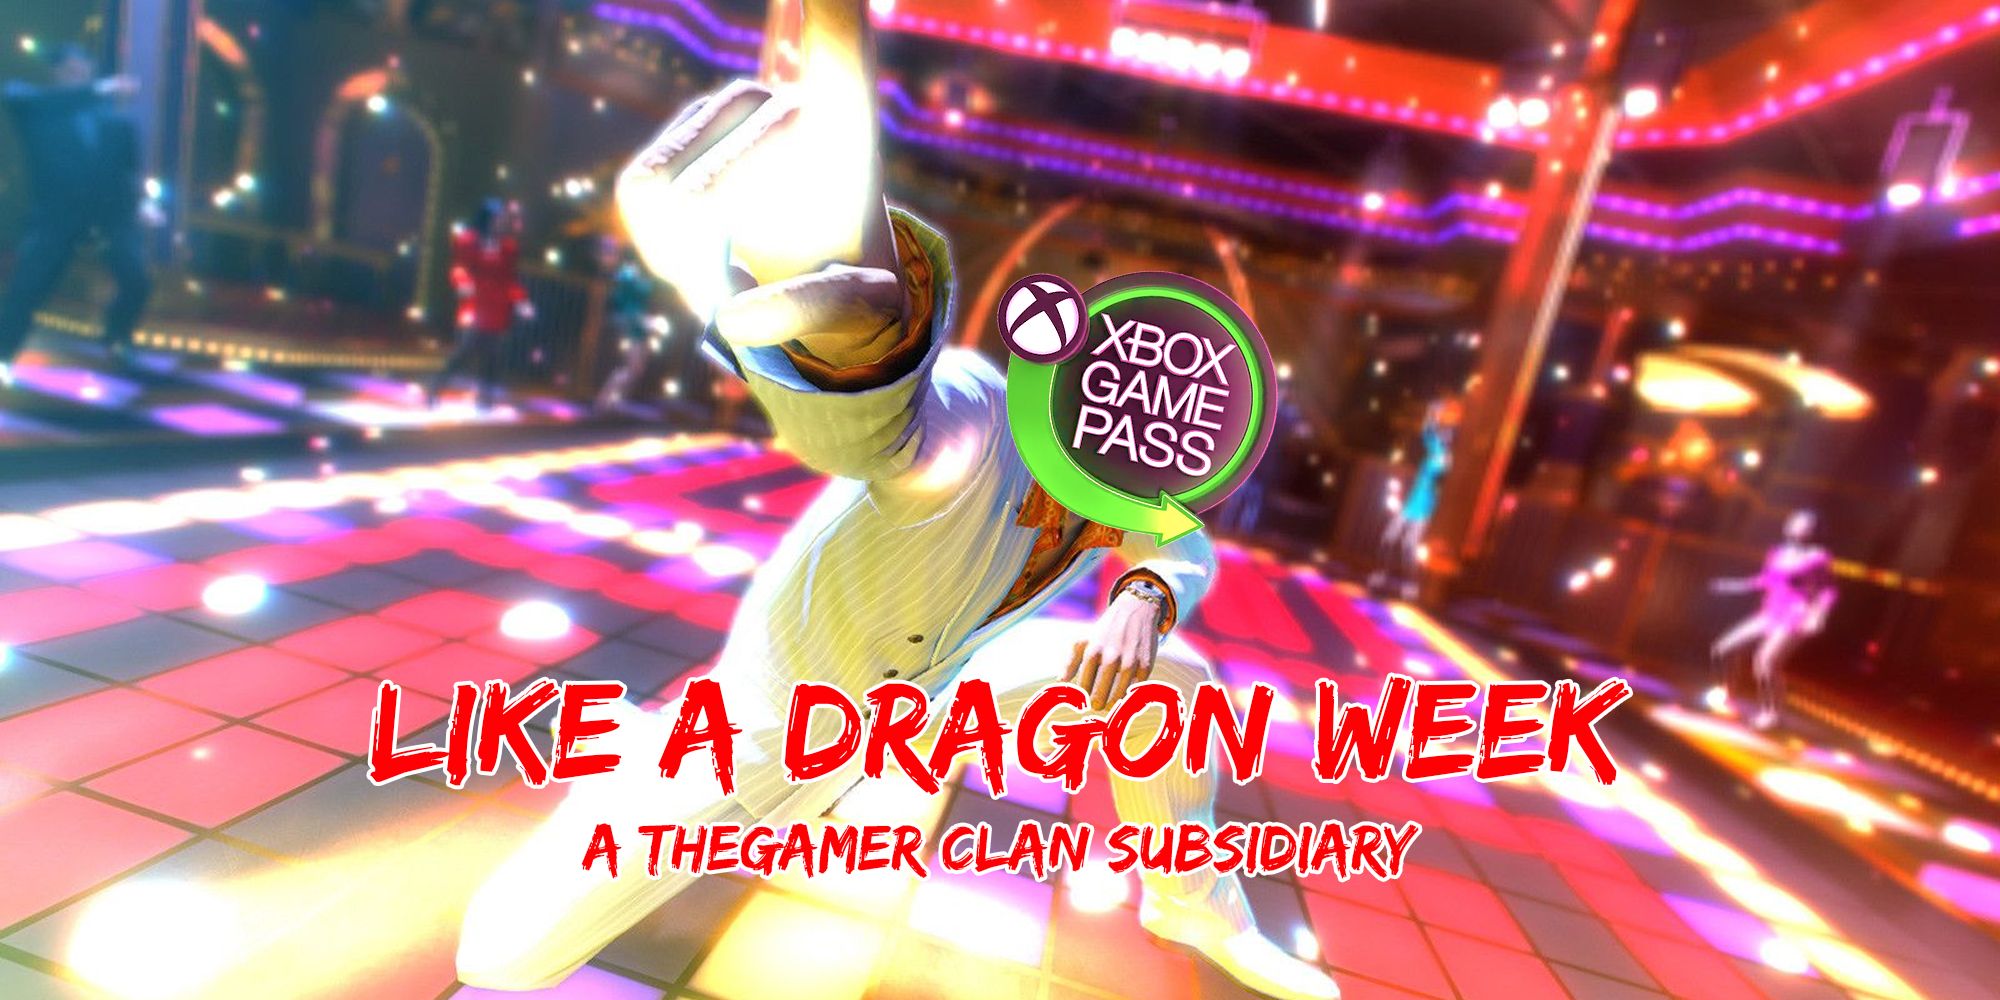 Kiryu posing on a dance floor in Yakuza 0 with the Xbox Game Pass logo for a head and Like a Dragon Week written over the top